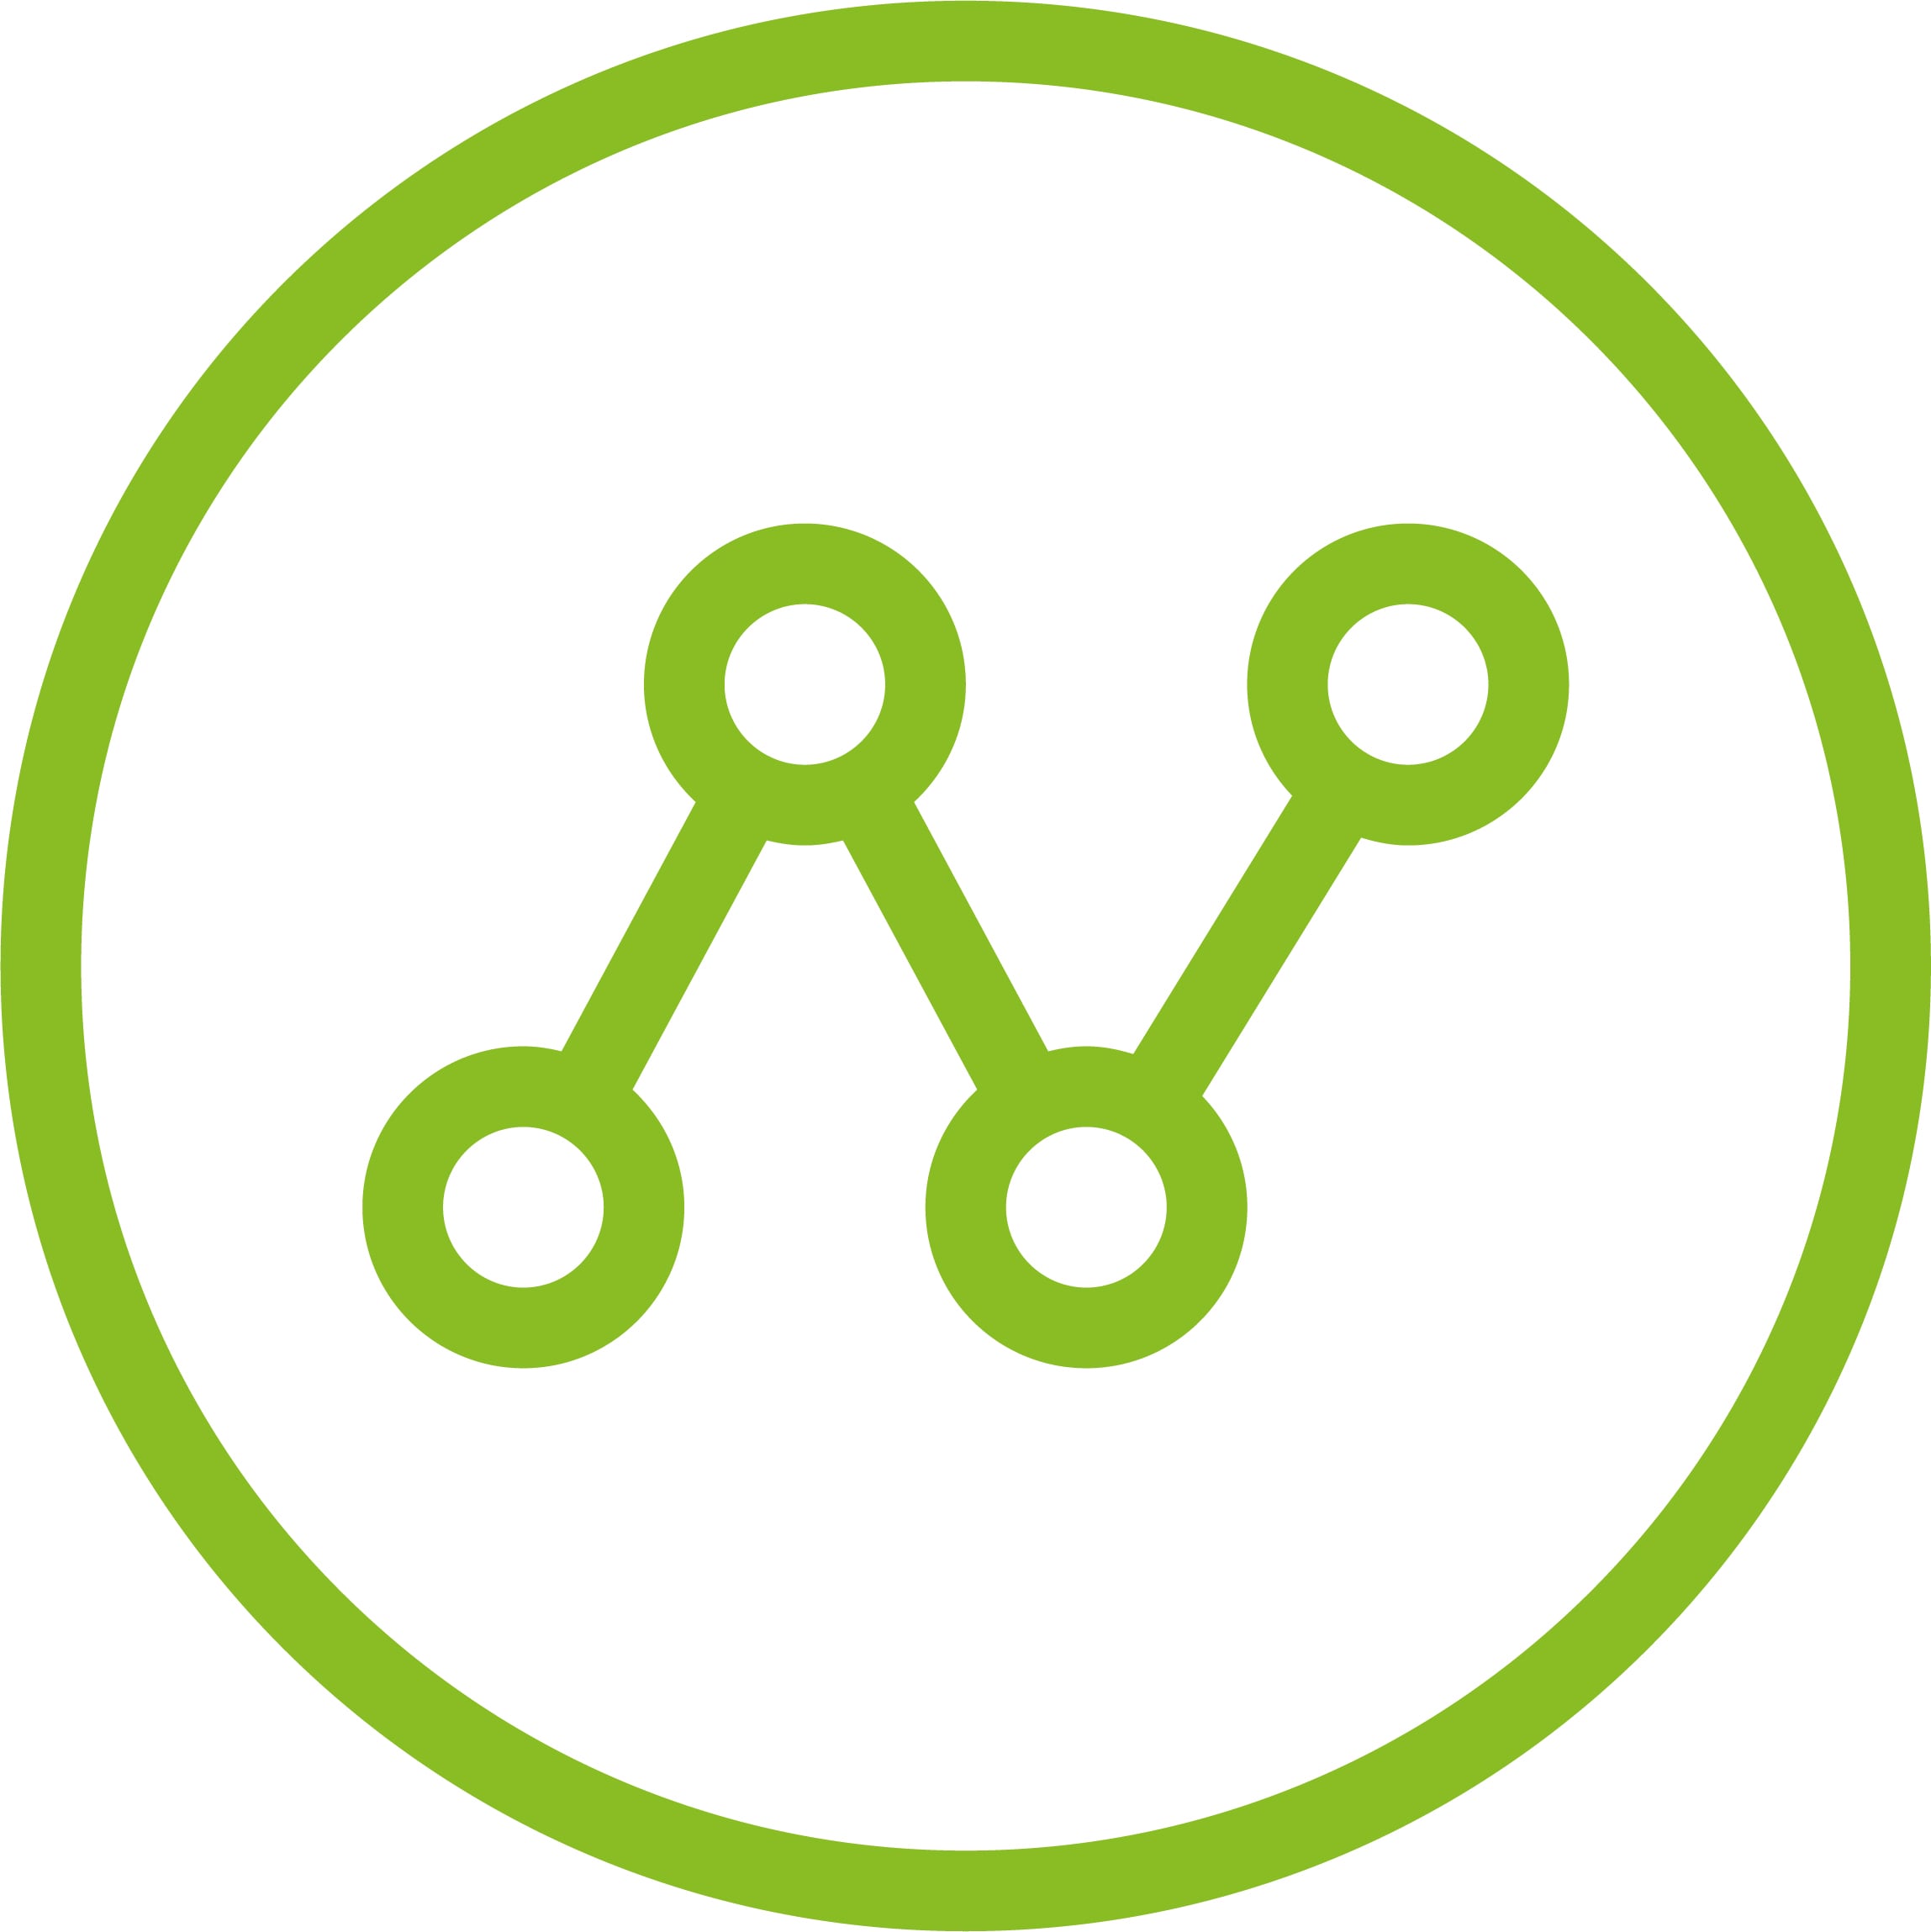 connected lines icon